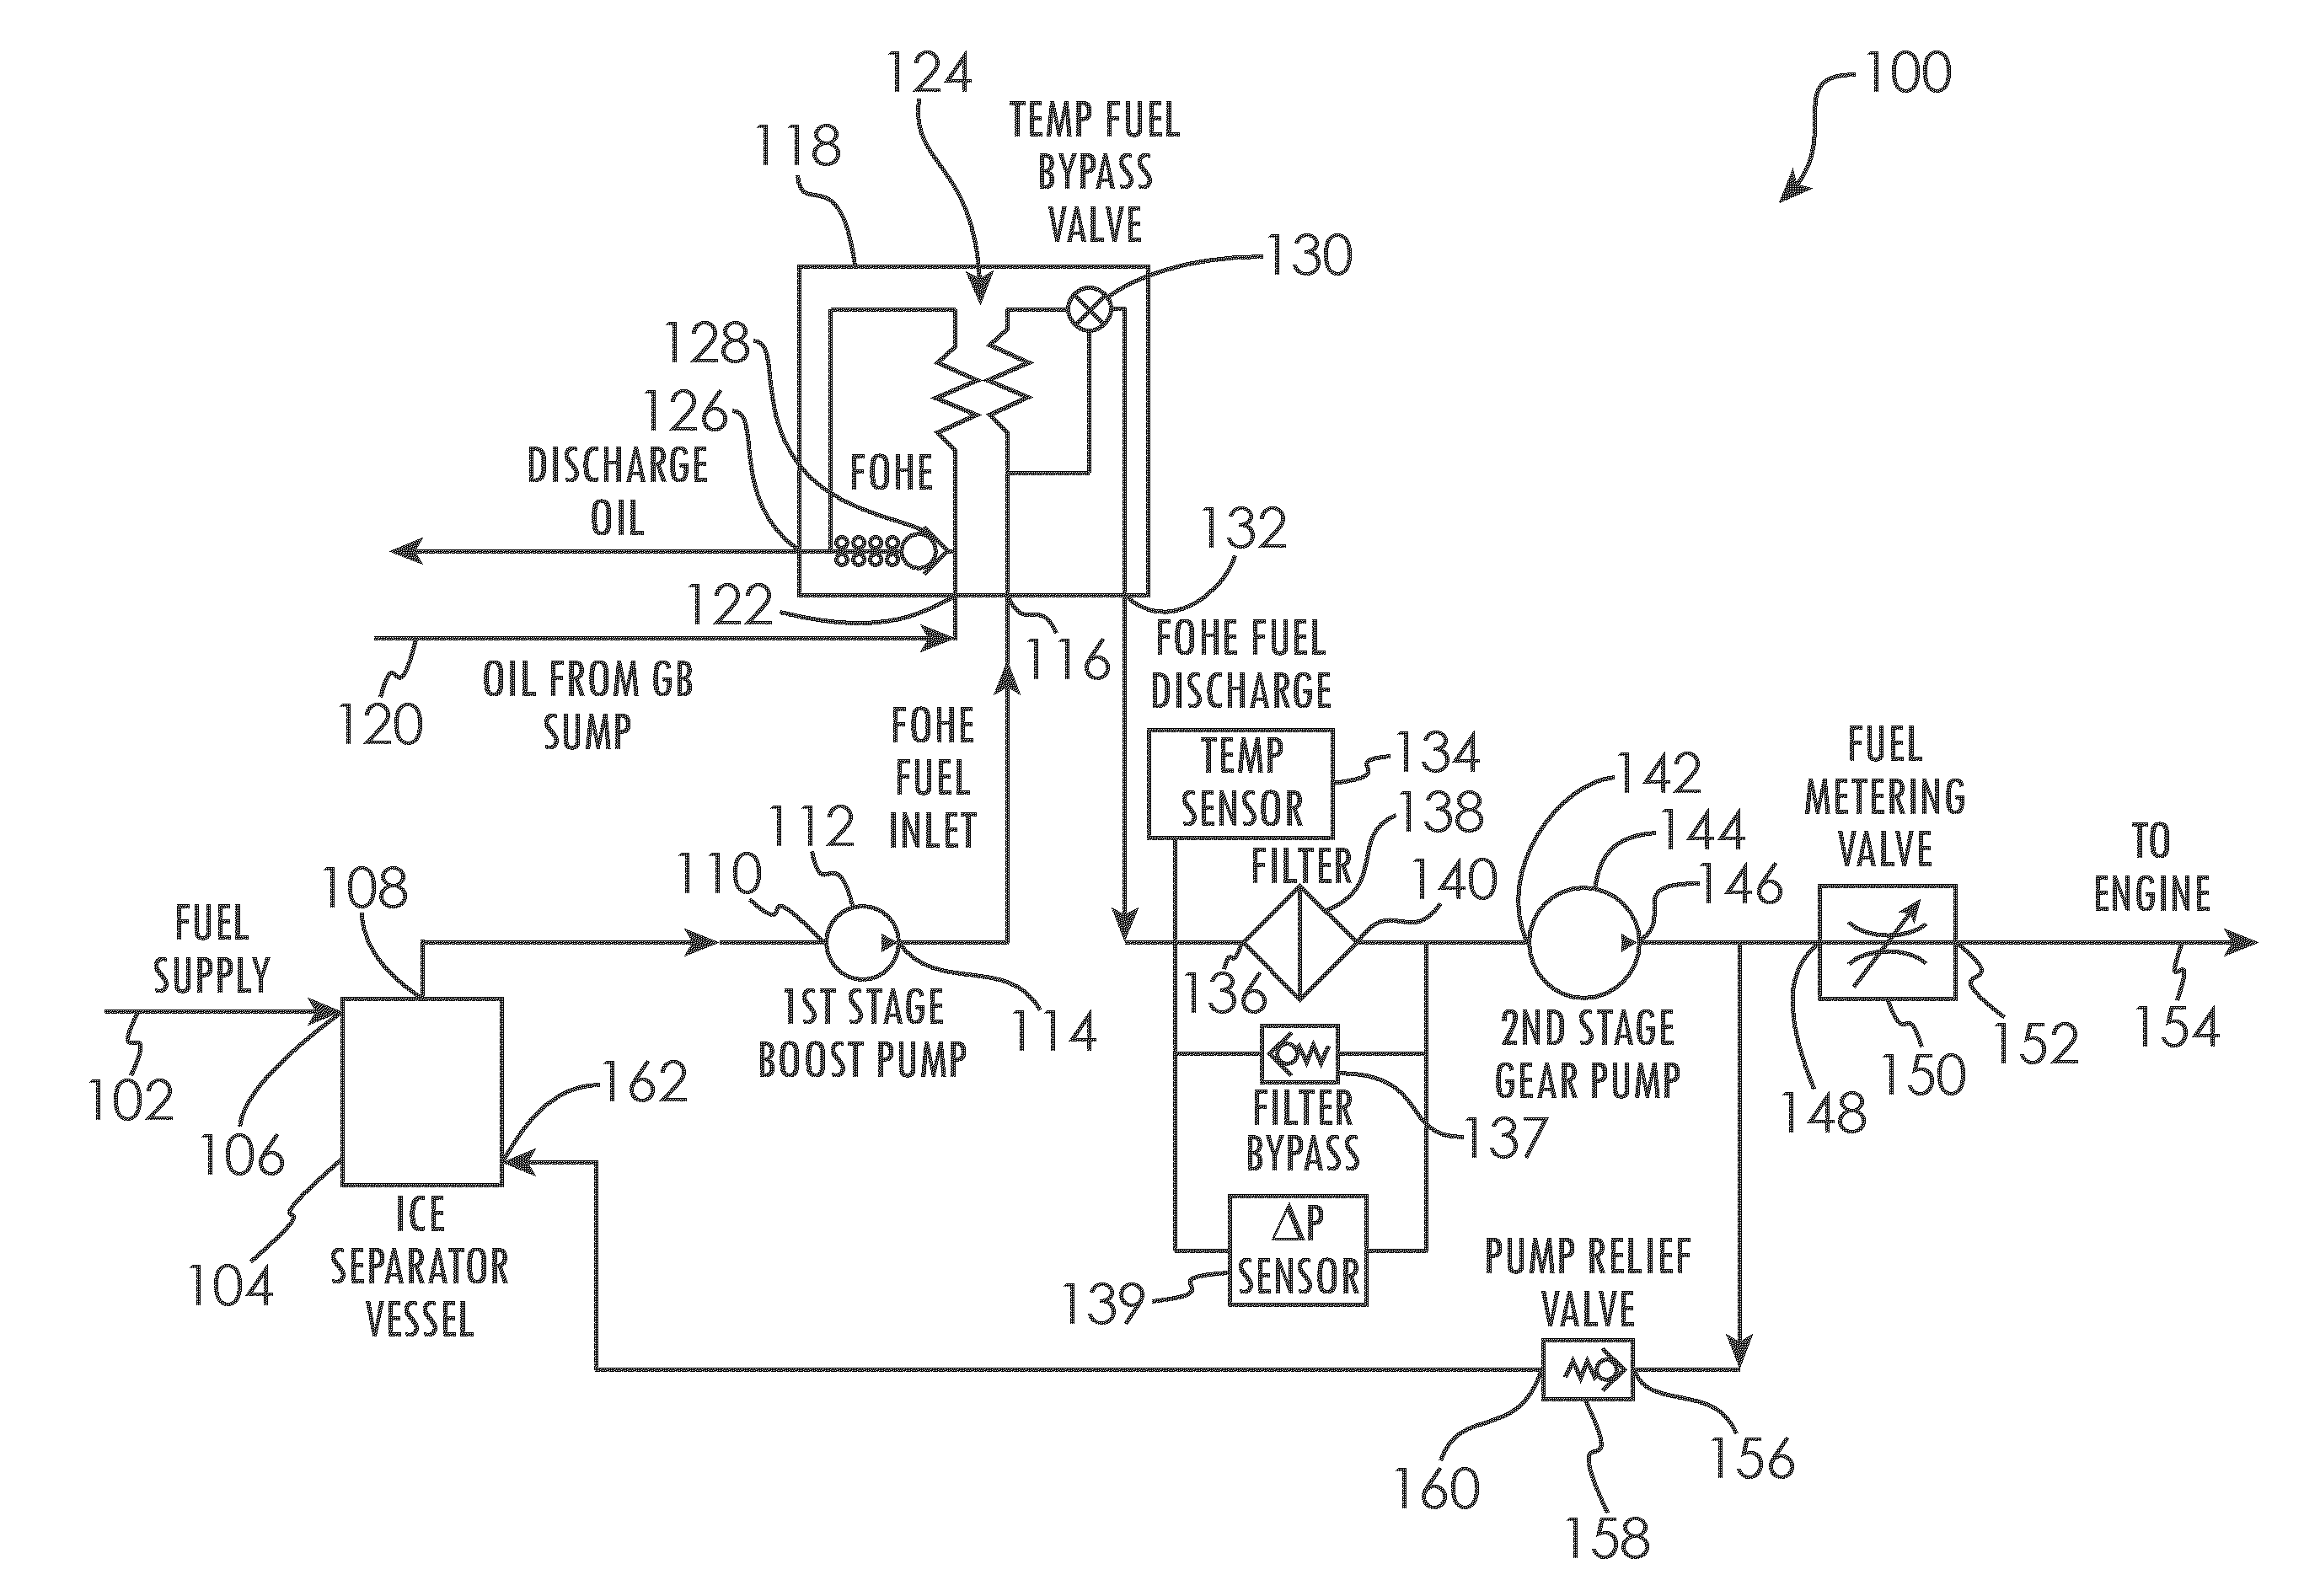 Removing non-homogeneous ice from a fuel system